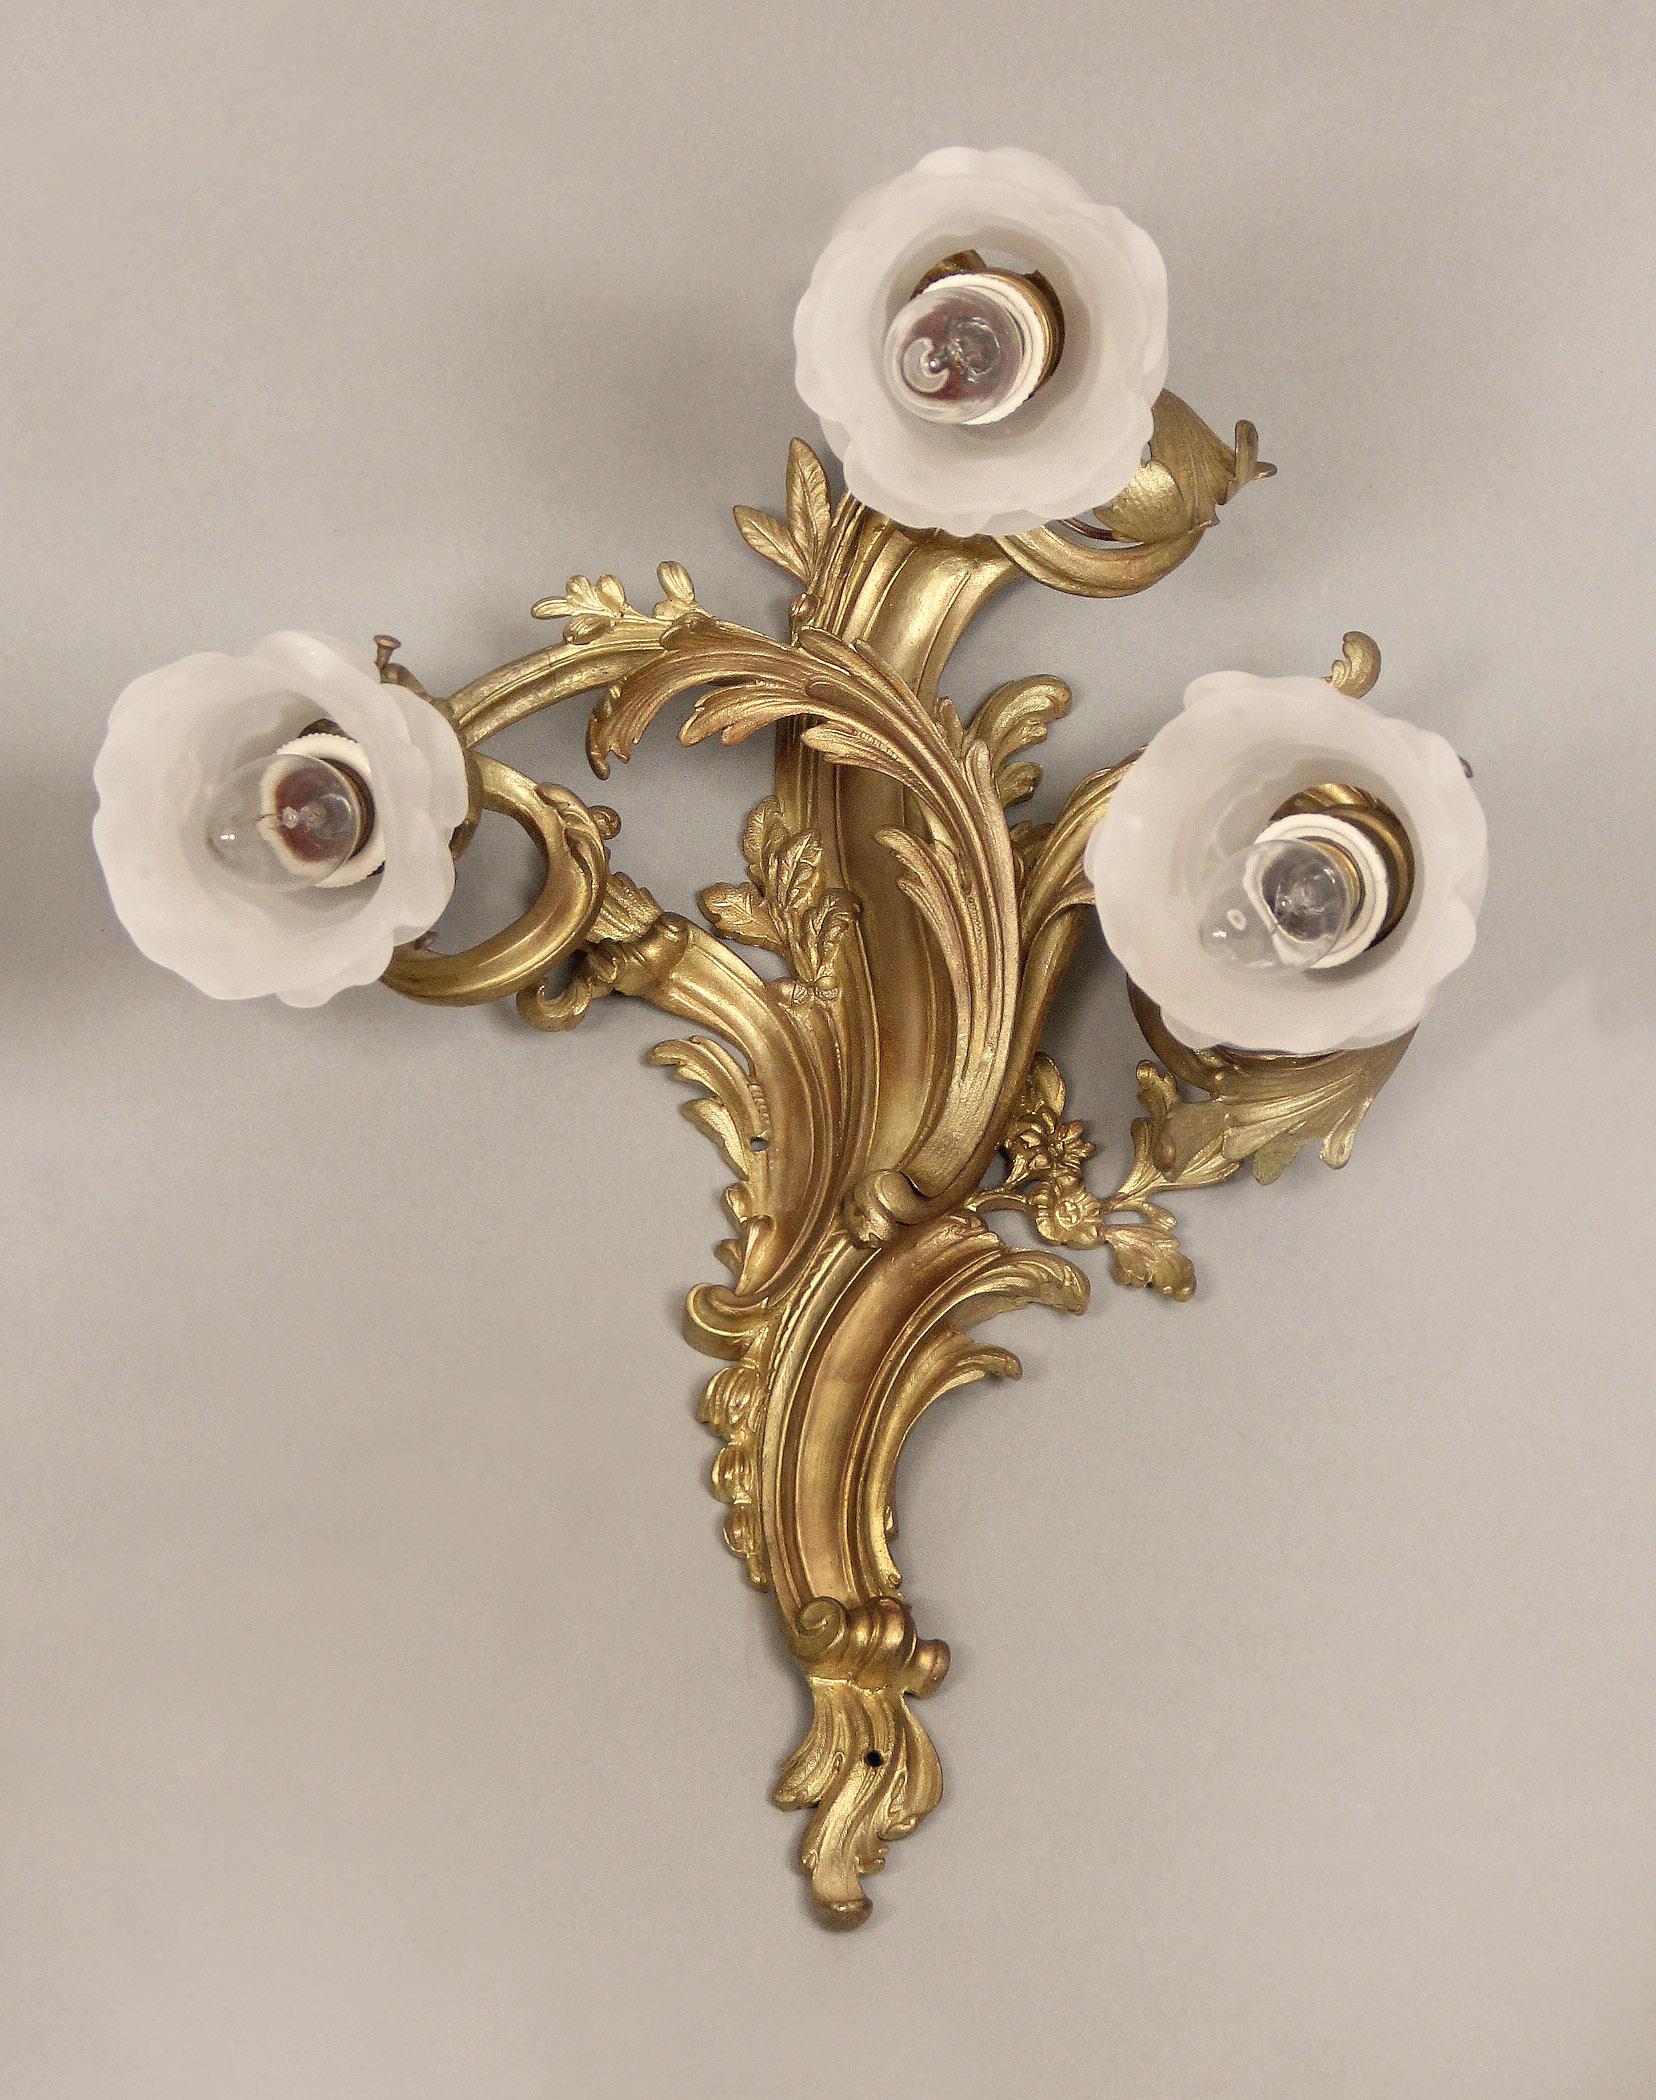 19th century sconces in nyc